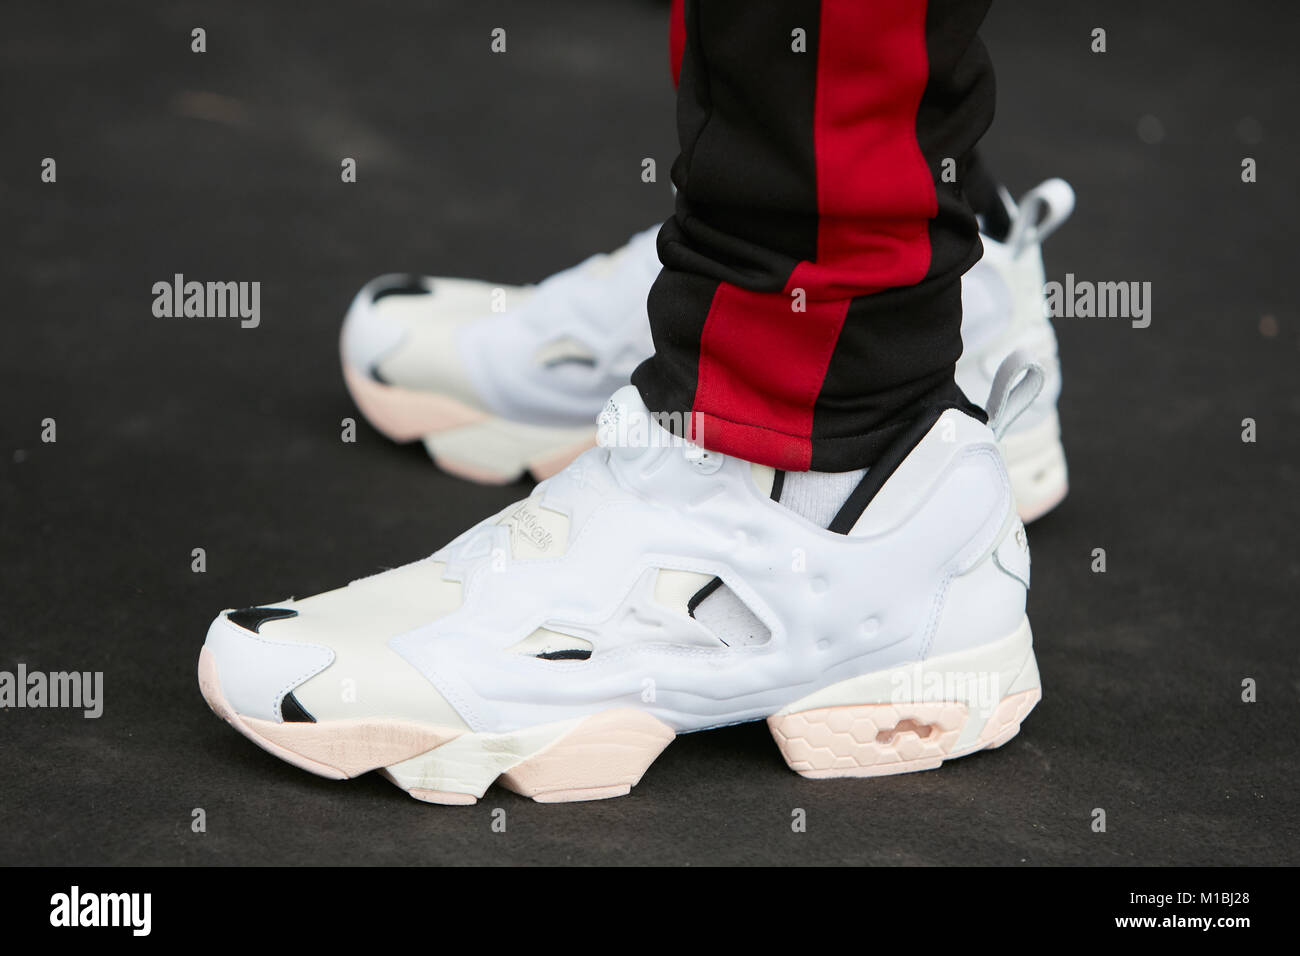 MILAN - JANUARY 15: Man with white Reebok Insta pump shoes and black  trousers with red stripe at Pal Zileri before fashion show, Milan Fashion  Week st Stock Photo - Alamy